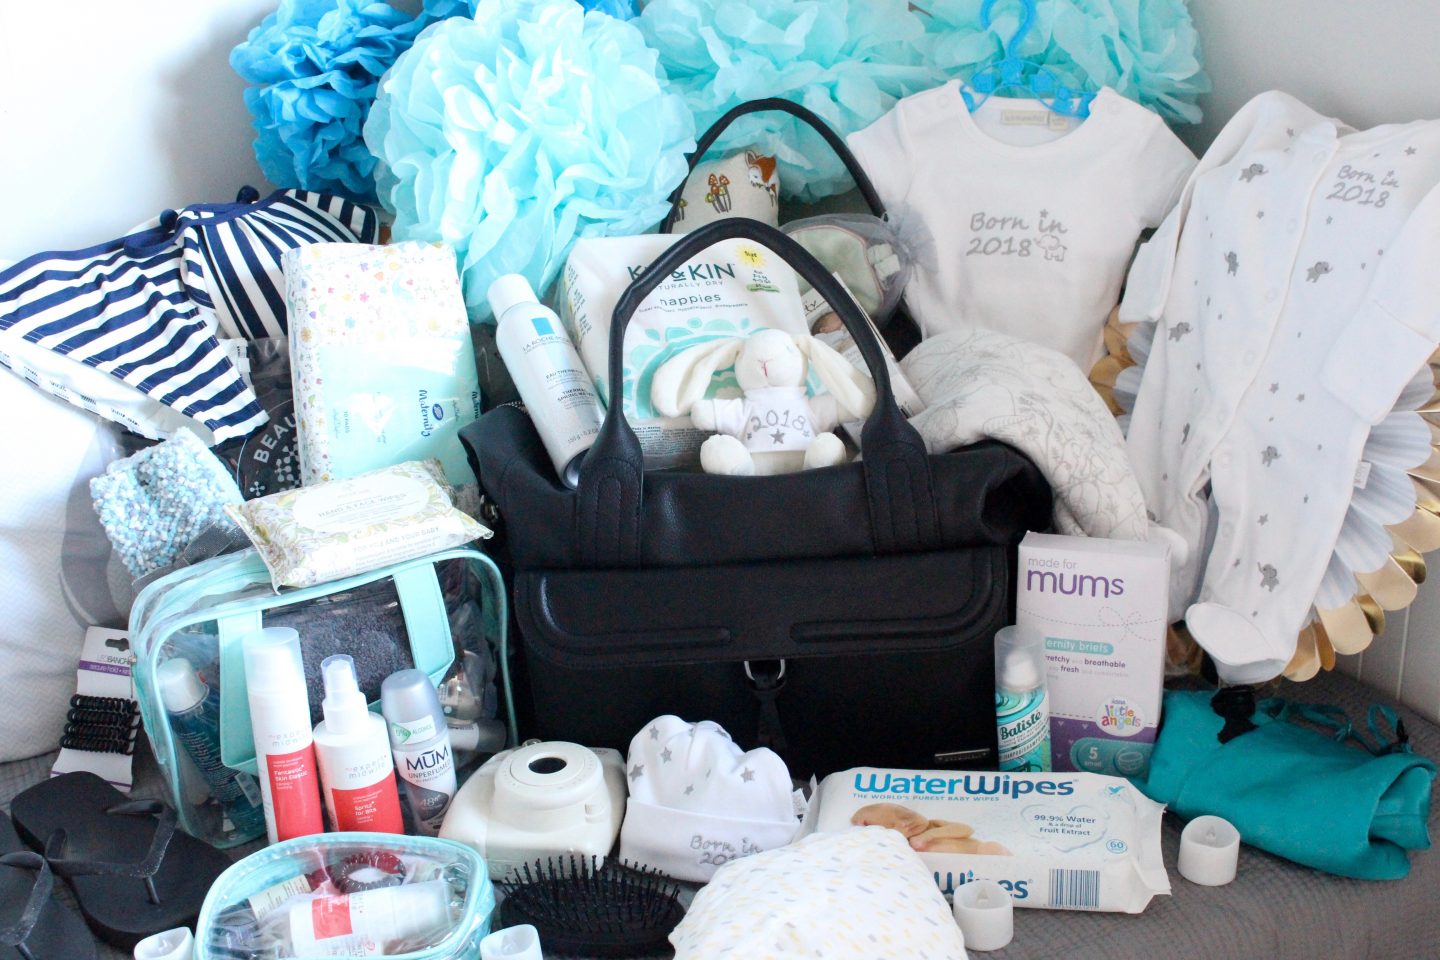 hospital bag checklist for mom, dad and baby - trista peterson